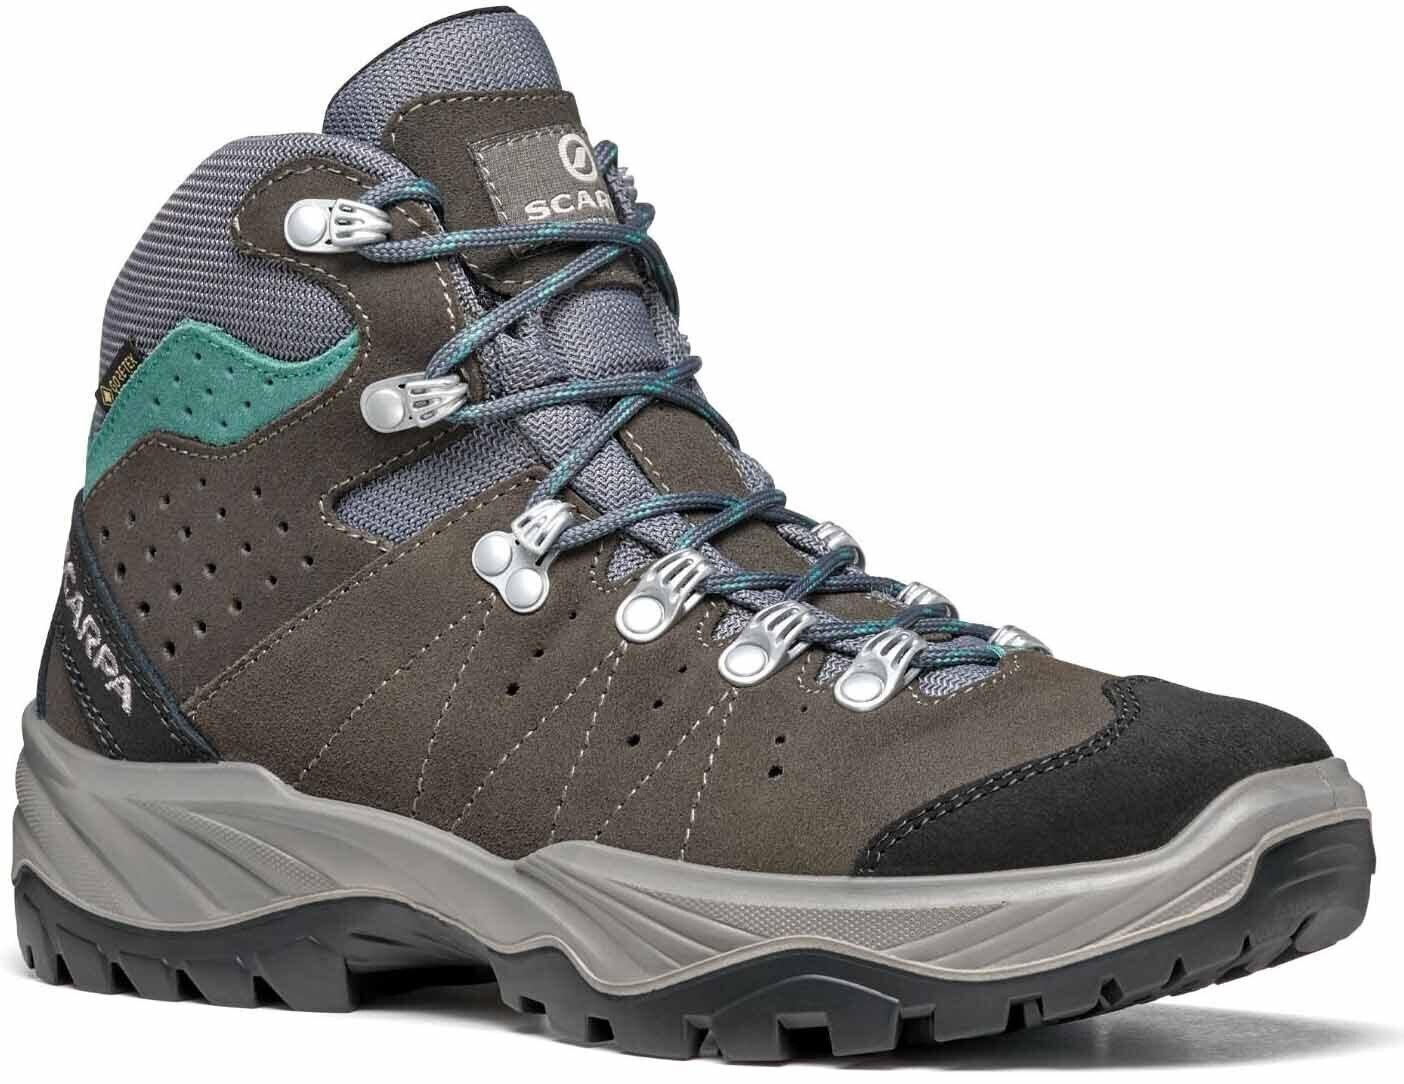 Chaussures outdoor femme Scarpa Mistral Gore Tex Smoke/Lagoon 40 Chaussures outdoor femme